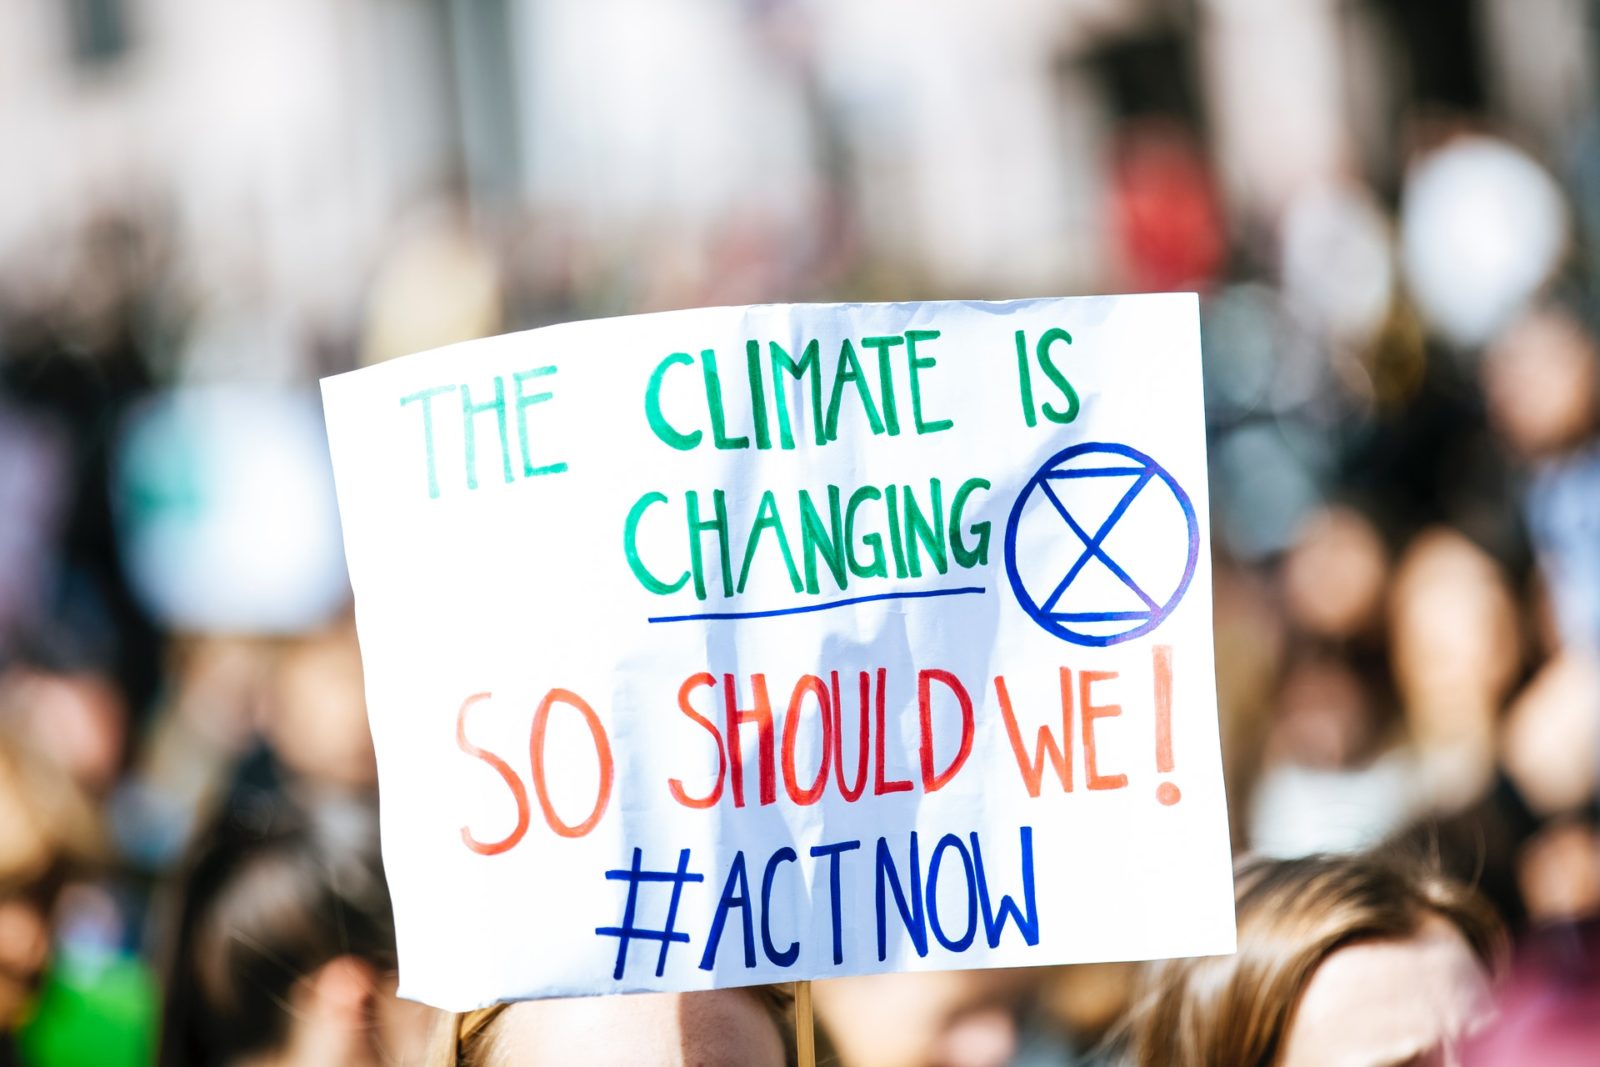 environmental donations: sign that says "the climate is changing, so should we! Act now